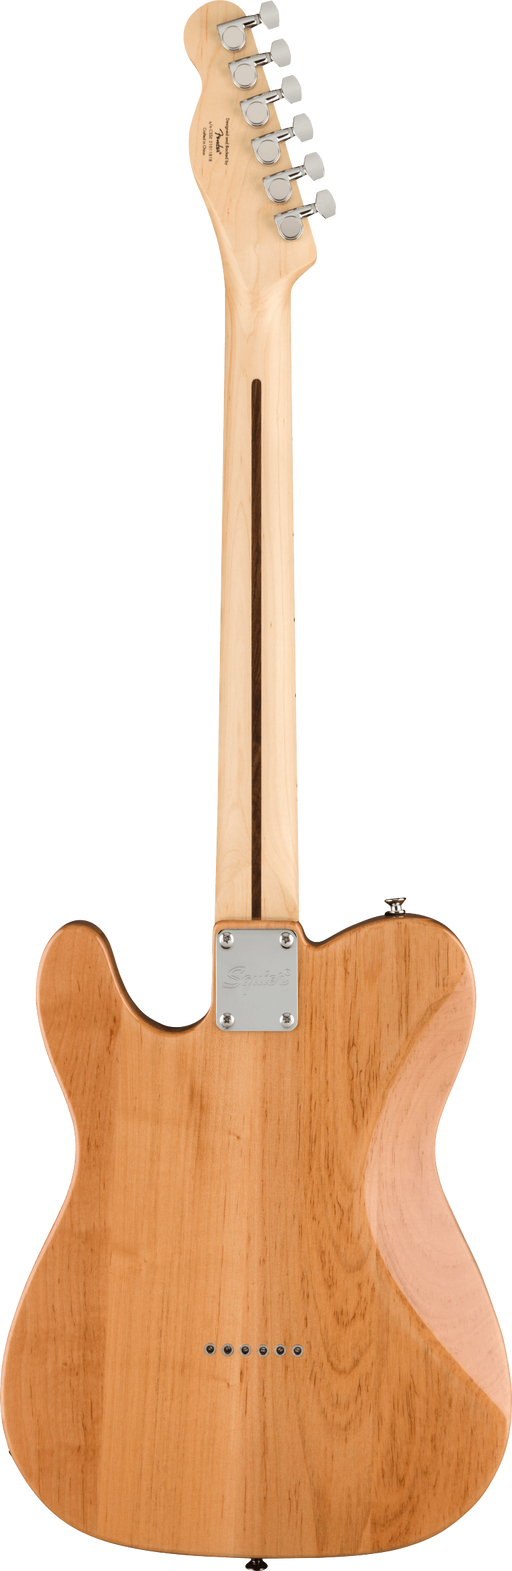 Squier Affinity Series Telecaster, Natural - Fair Deal Music